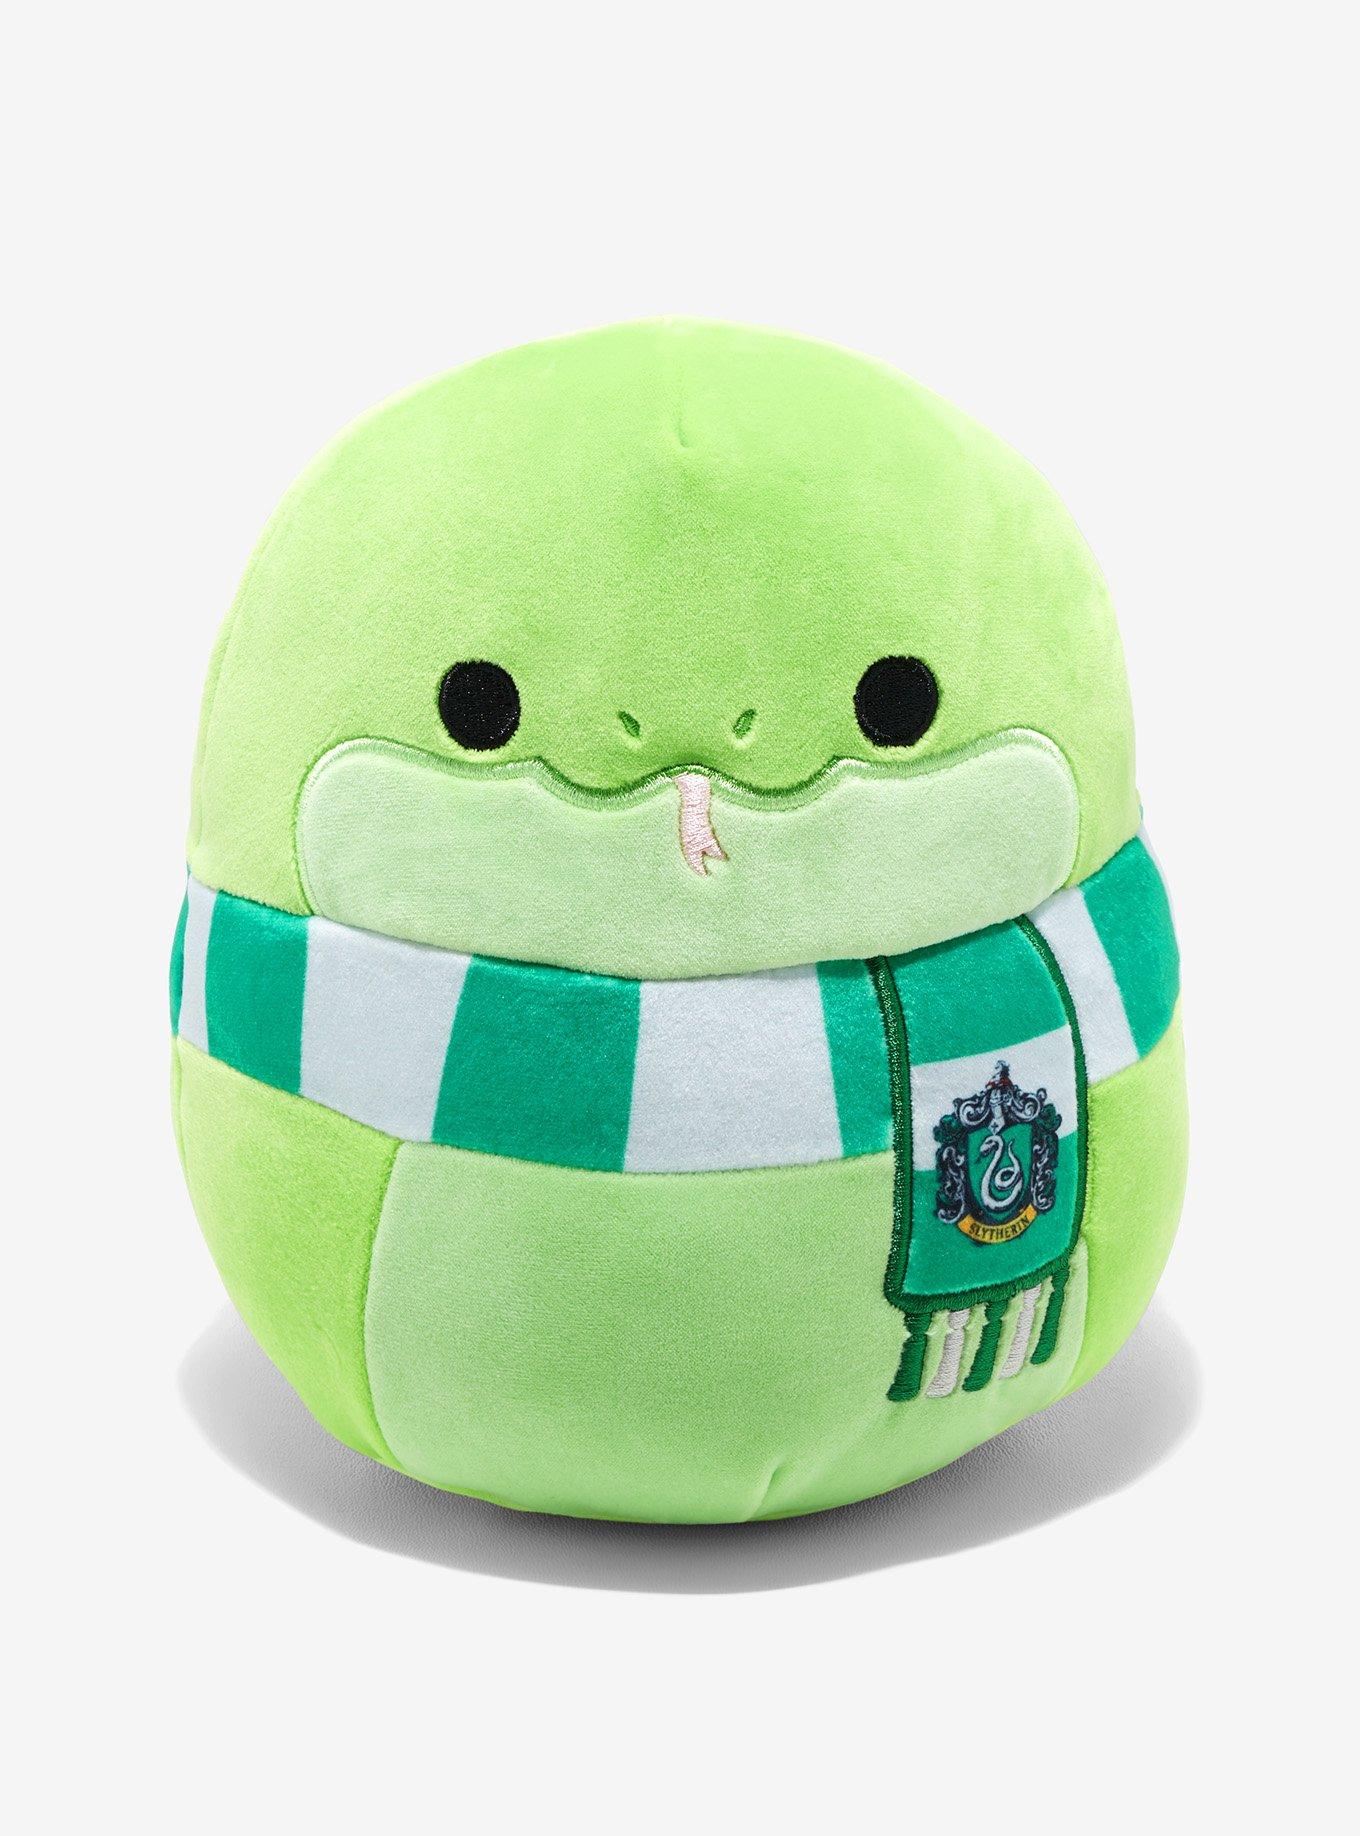 Marie Clark on Instagram: Harry Potter Squishmallows are at